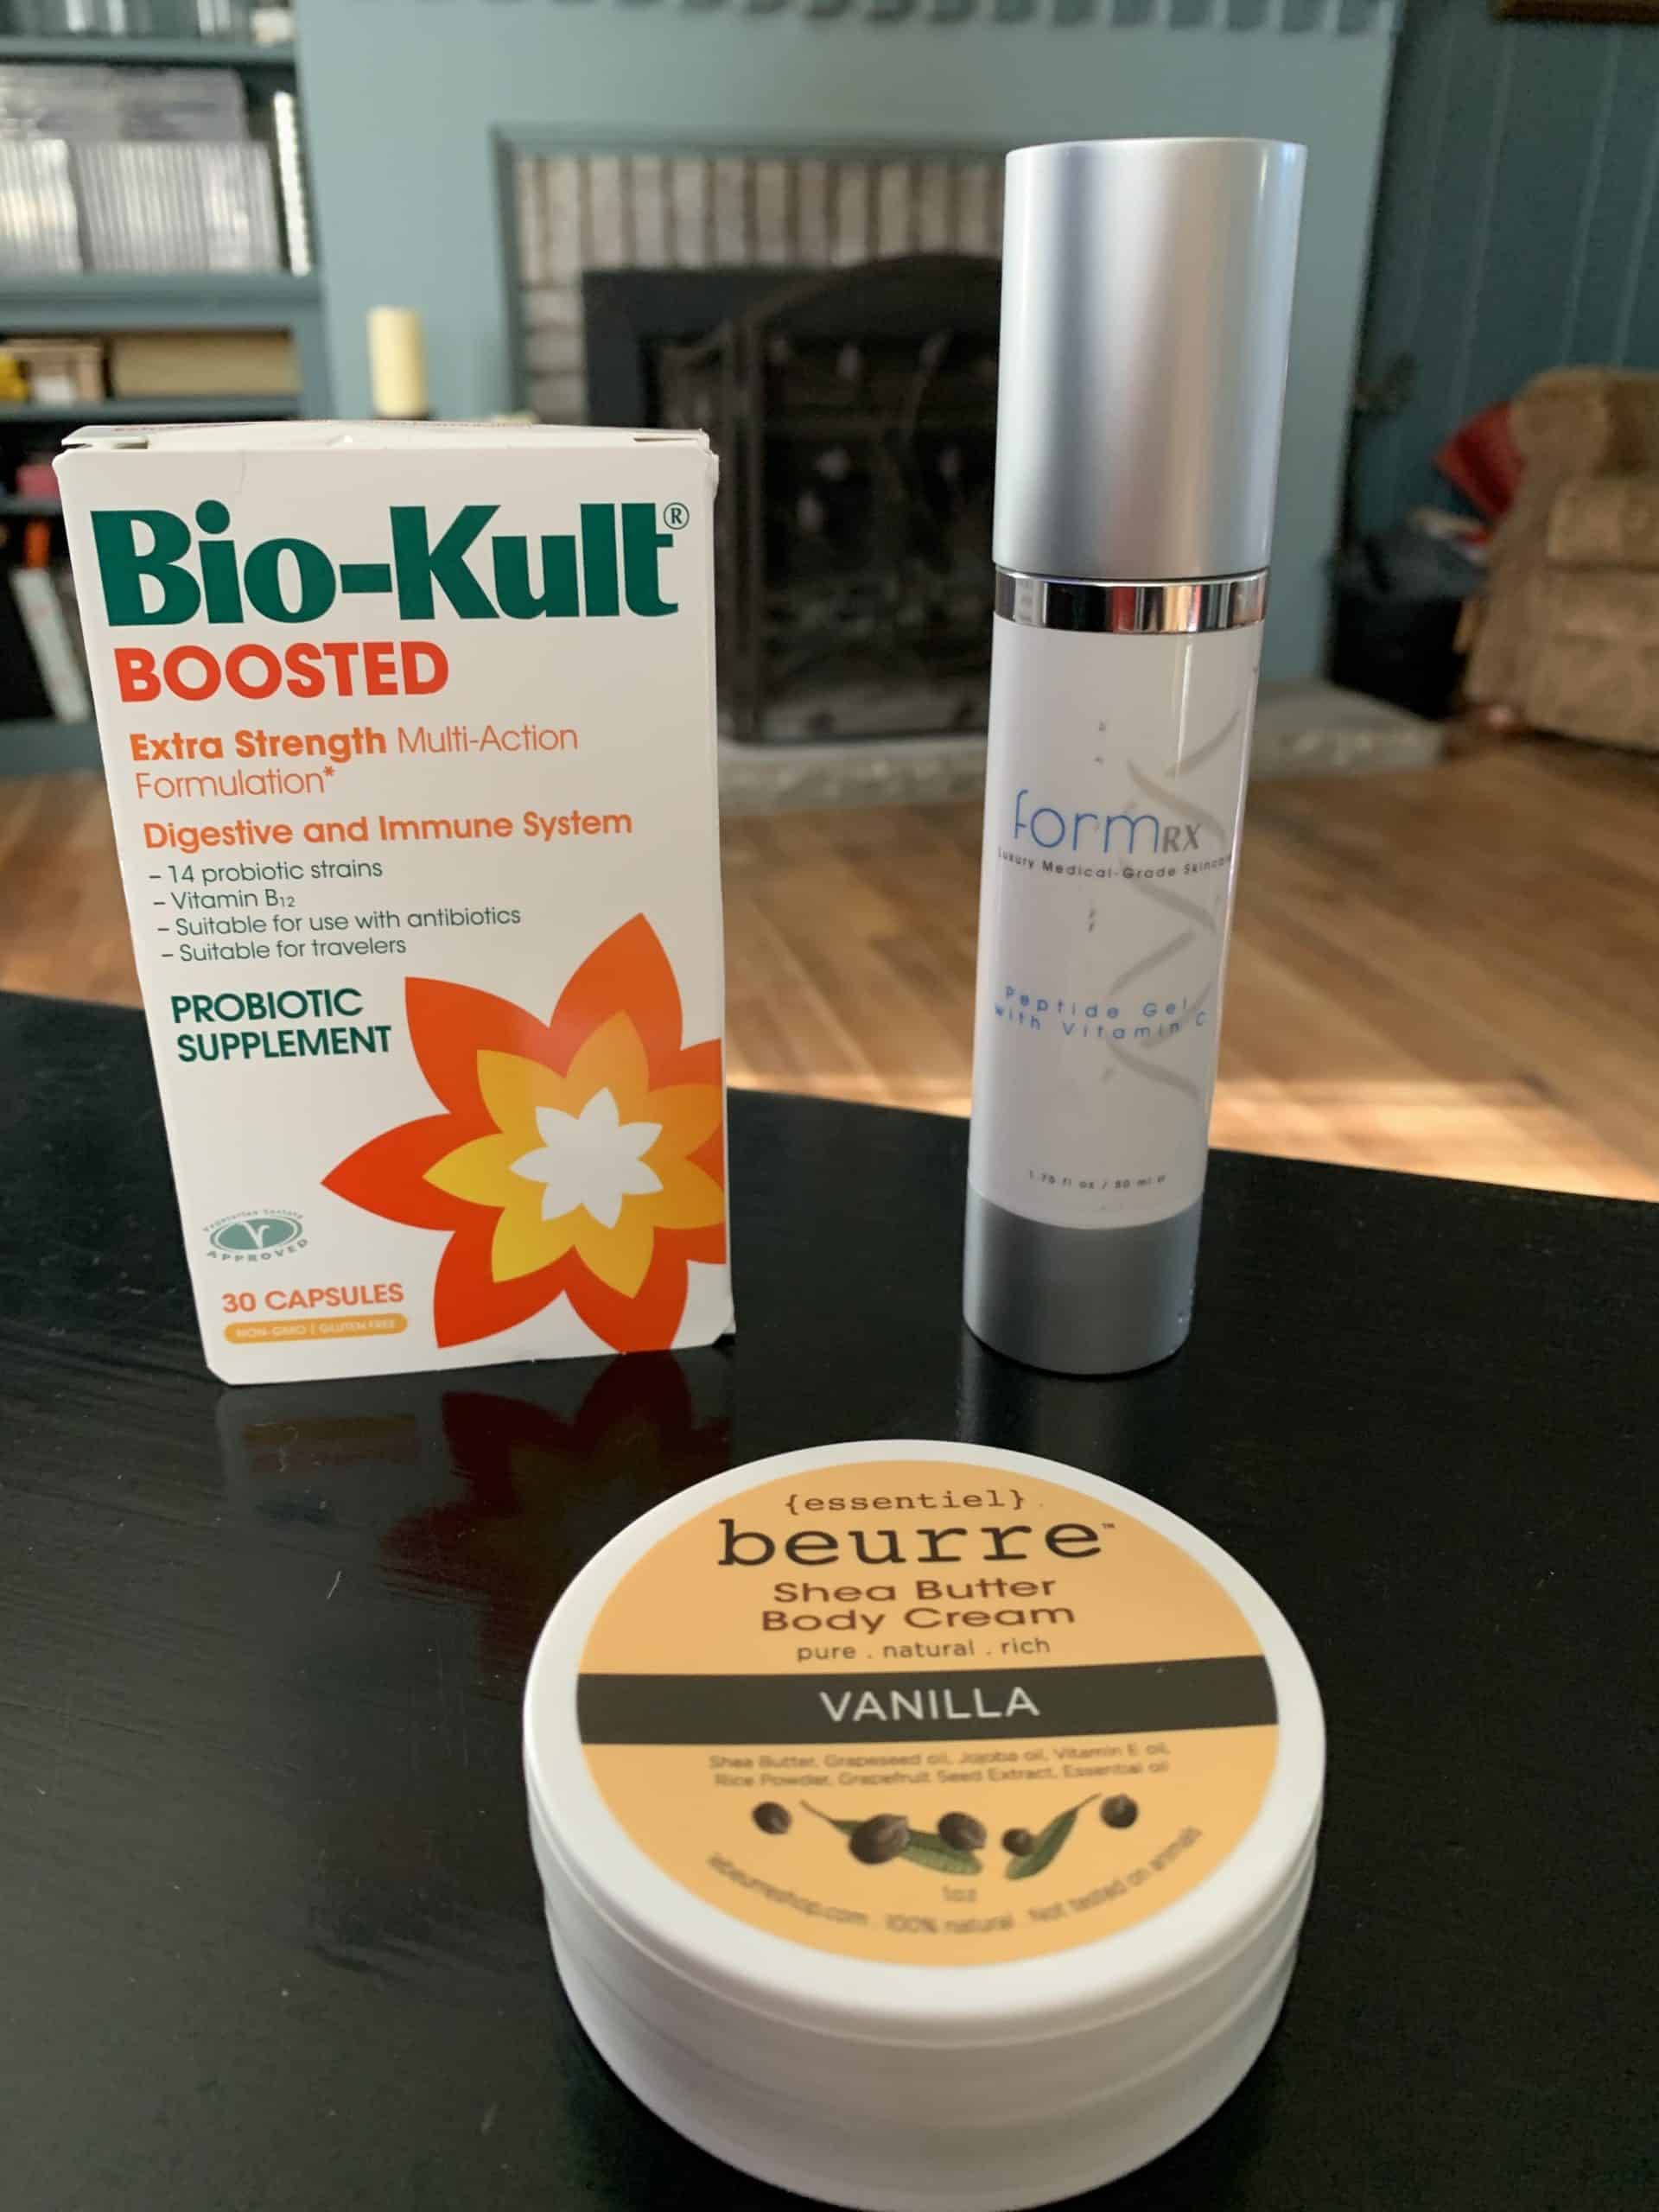 products to make your life easier in 2022 - biocult immunity essential beurre formrx